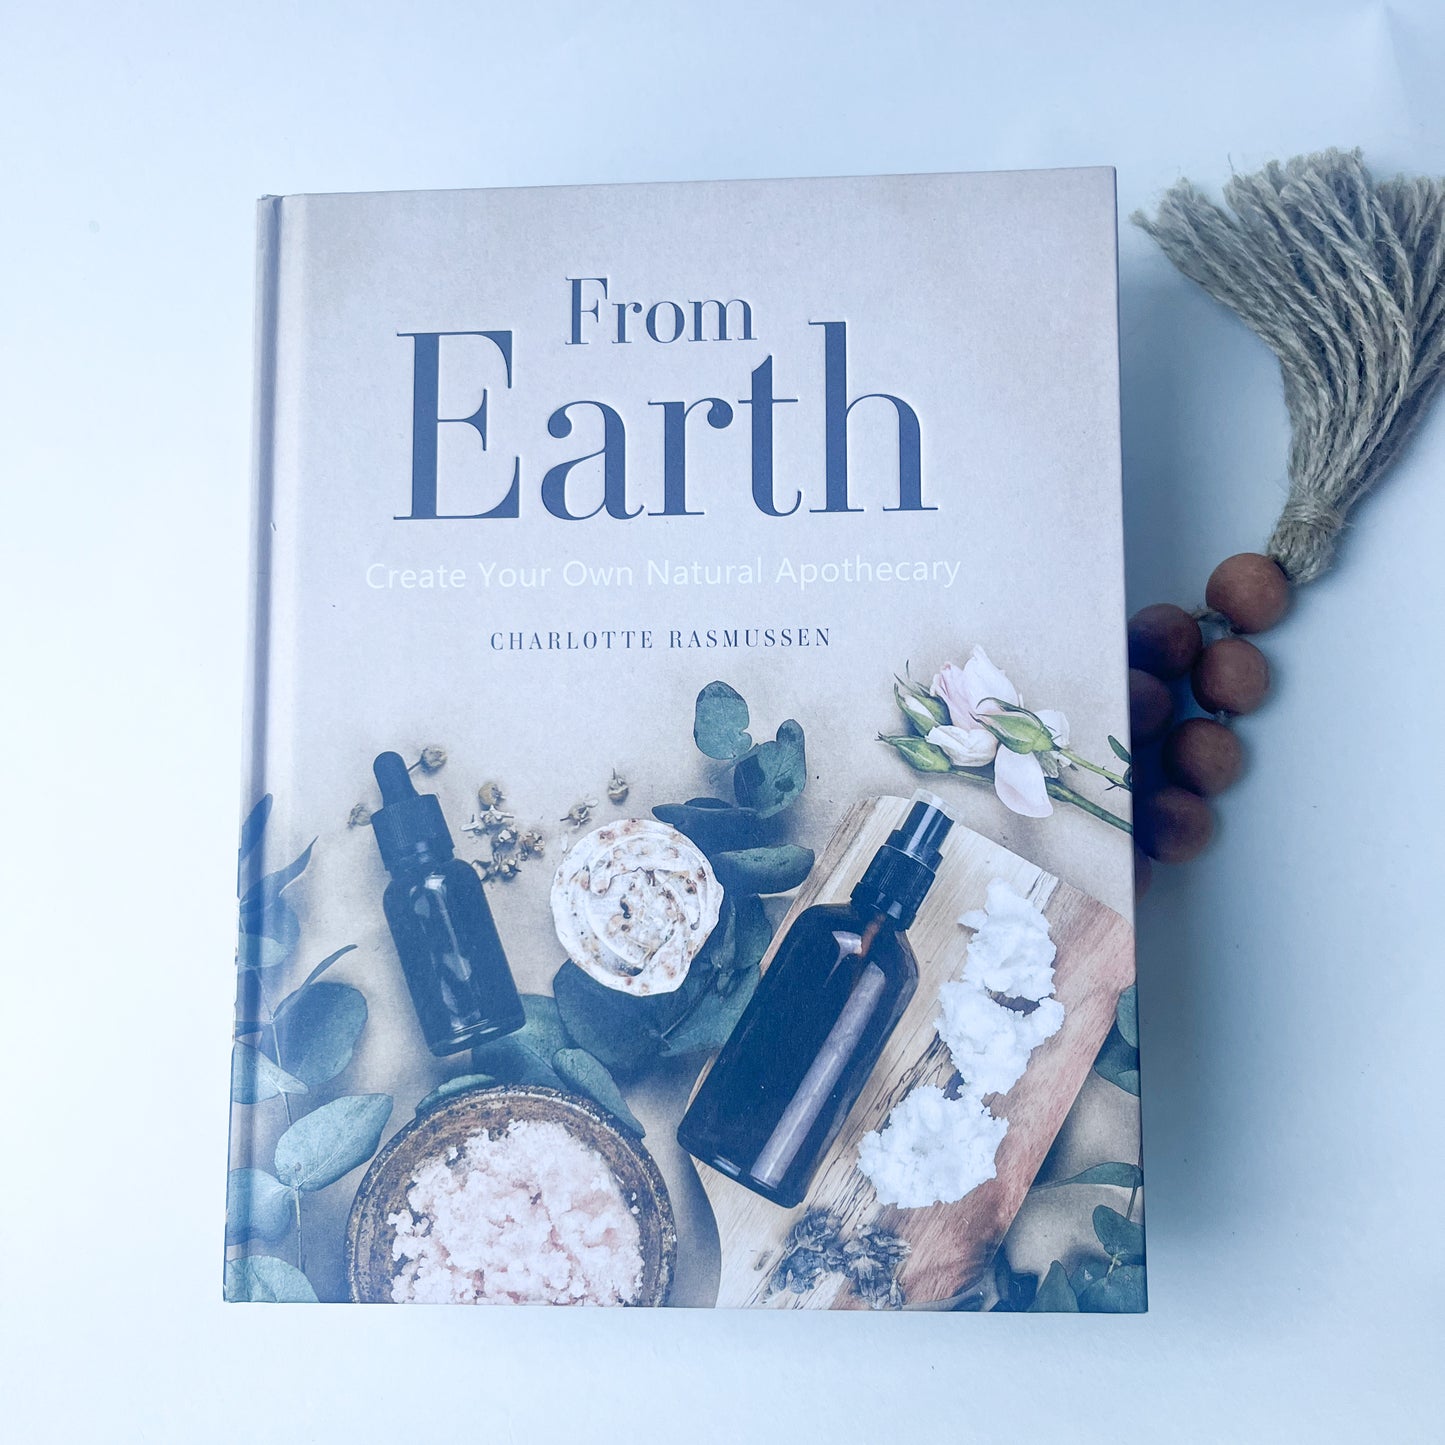 From Earth - Charlotte Rasmussen